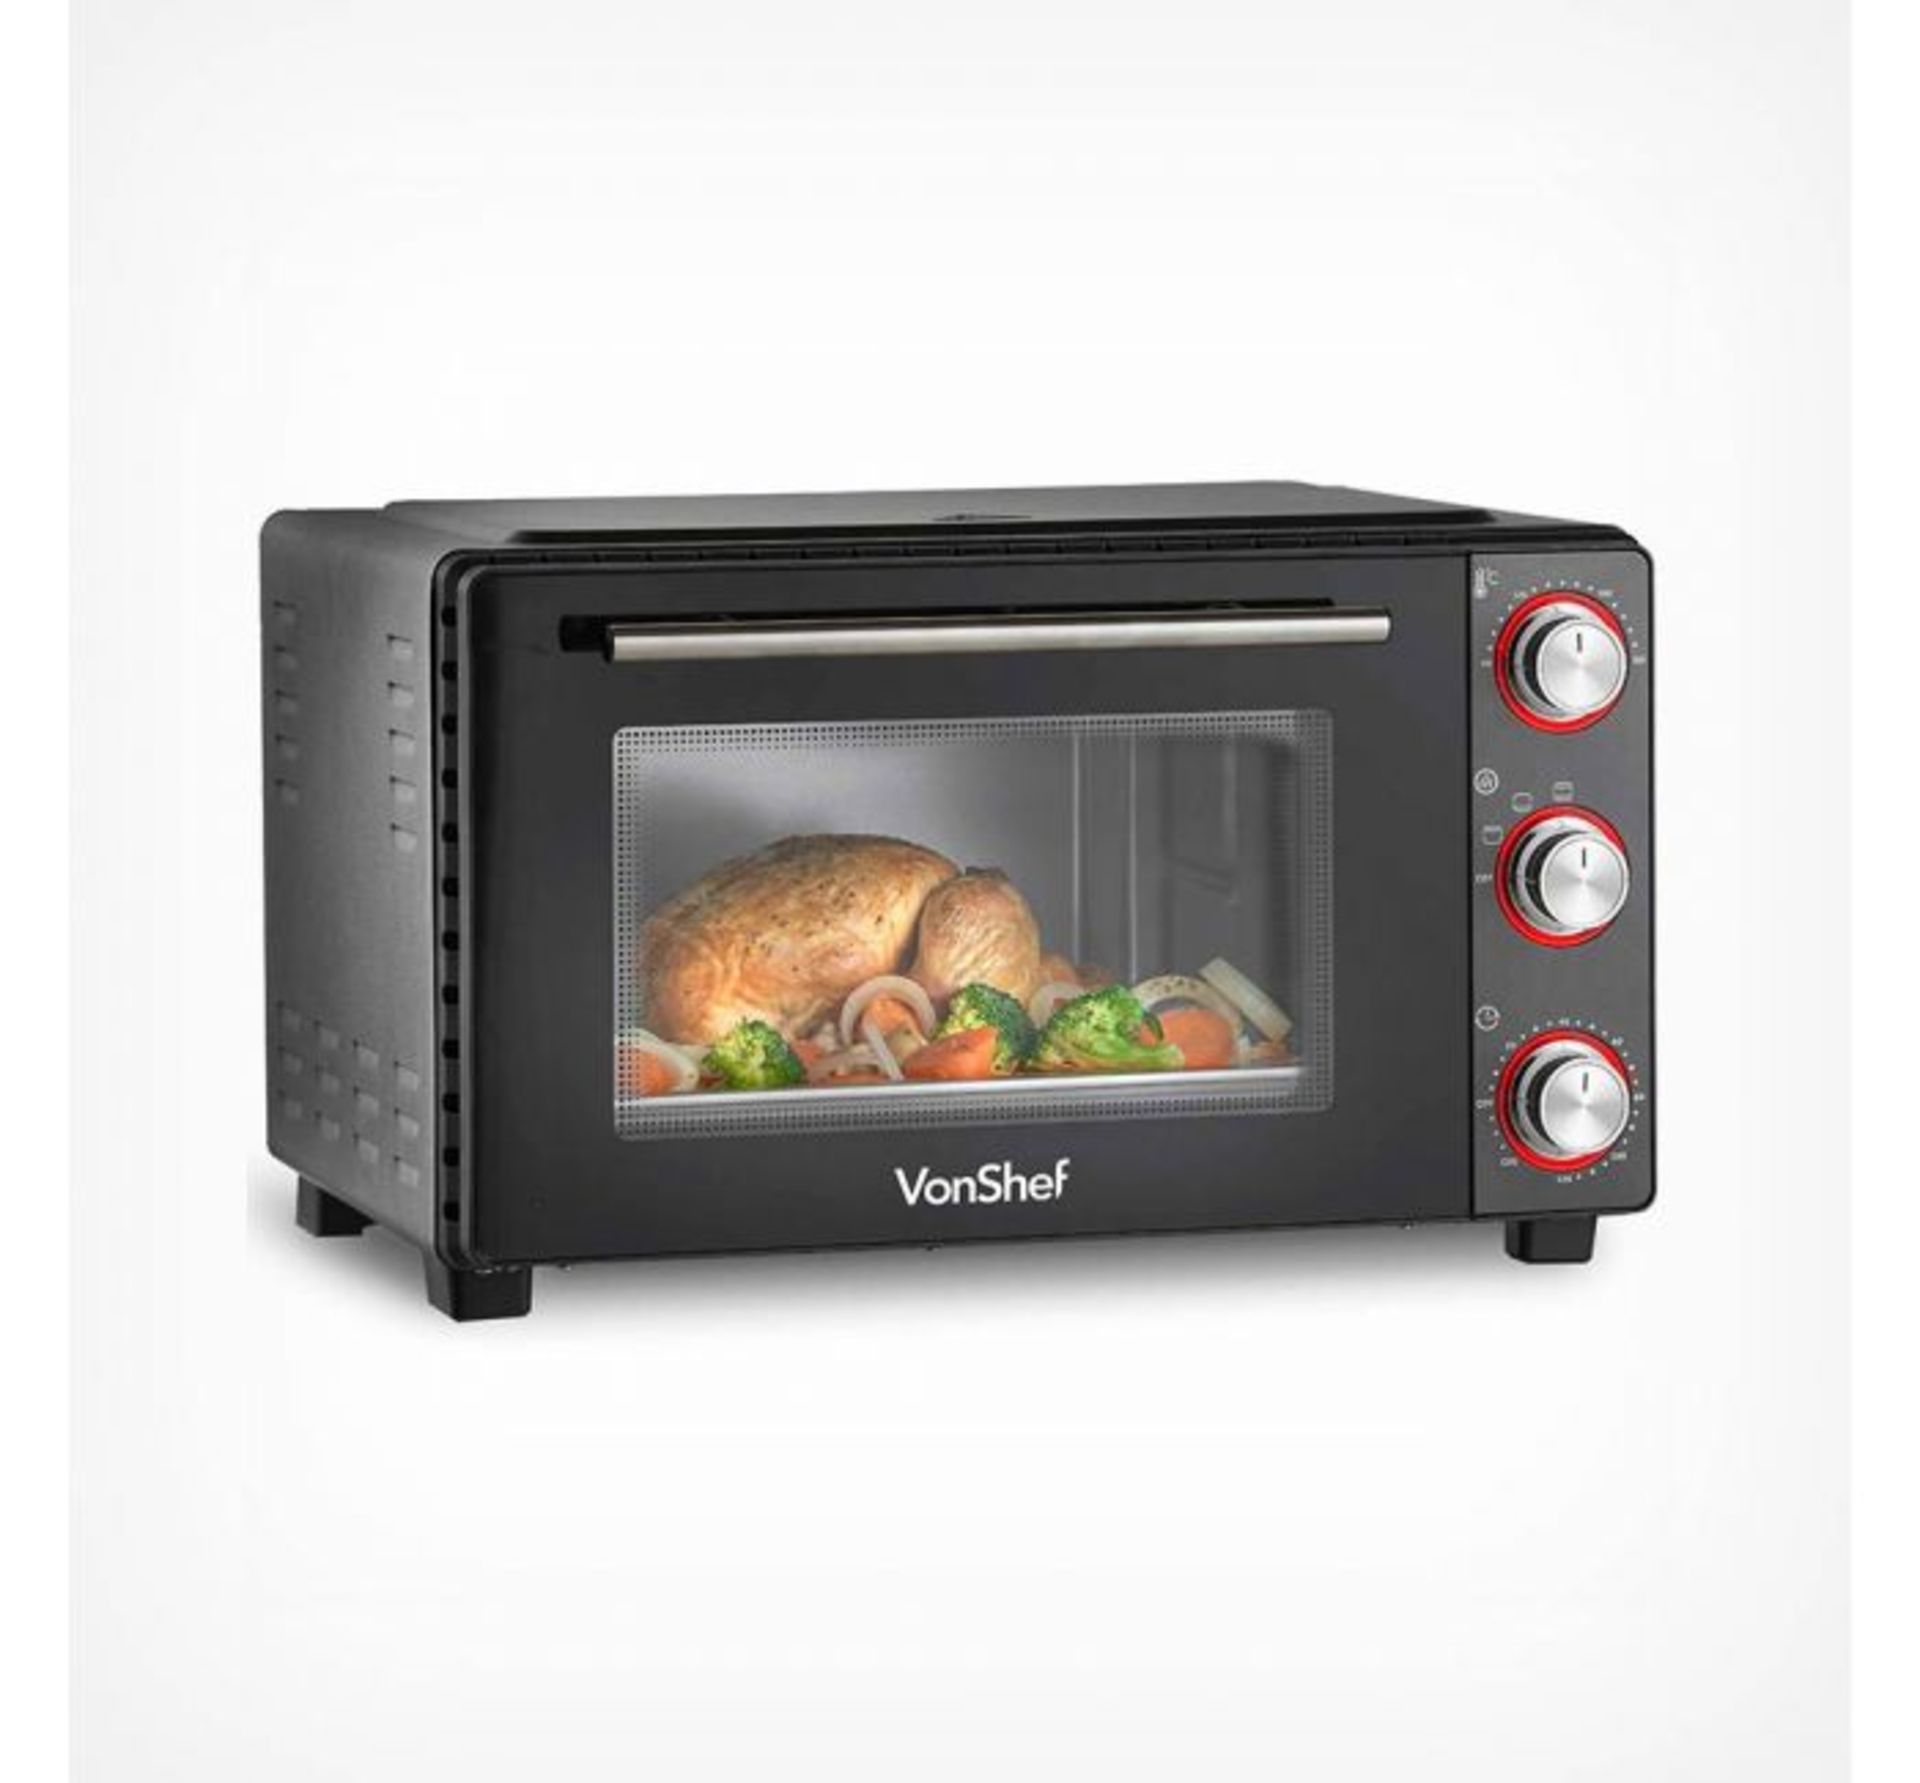 (HZ140) 28L Mini Oven Cooker & Grill 28L capacity and unobtrusive size makes it ideal for spac... - Image 2 of 3